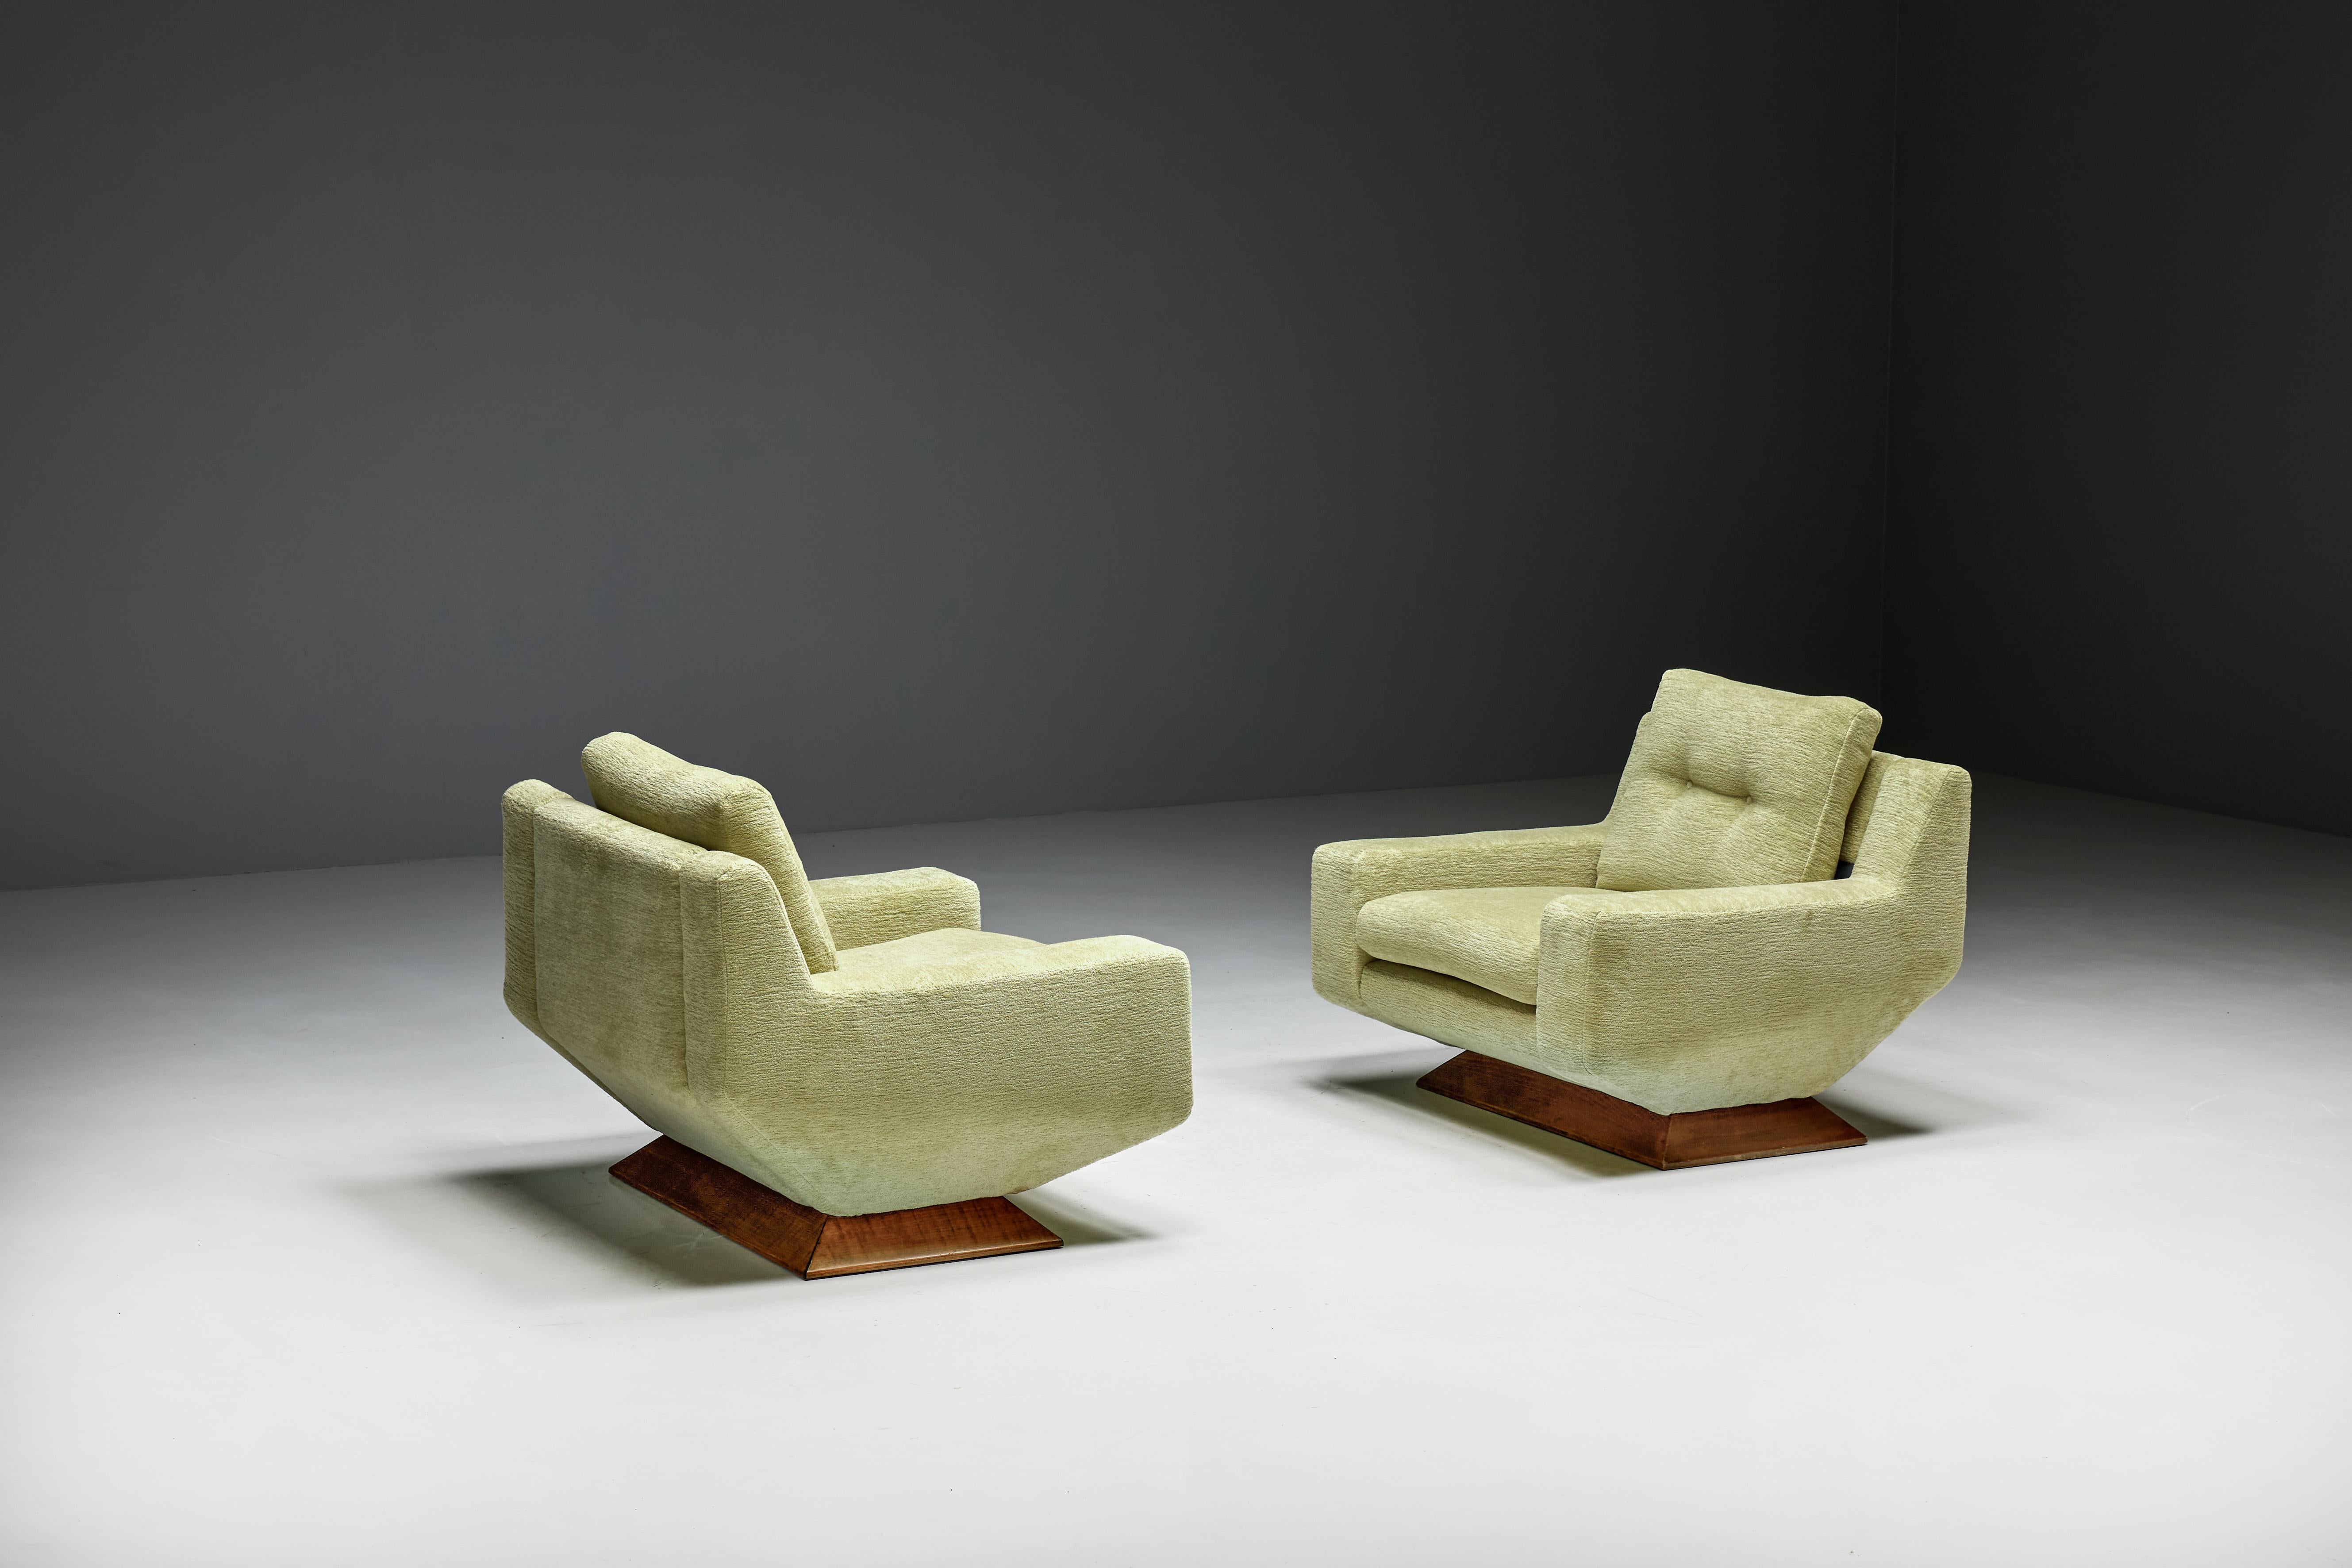 Italian Mid-Century Club Chairs in Pierre Frey Chenille, Italy, 1960s For Sale